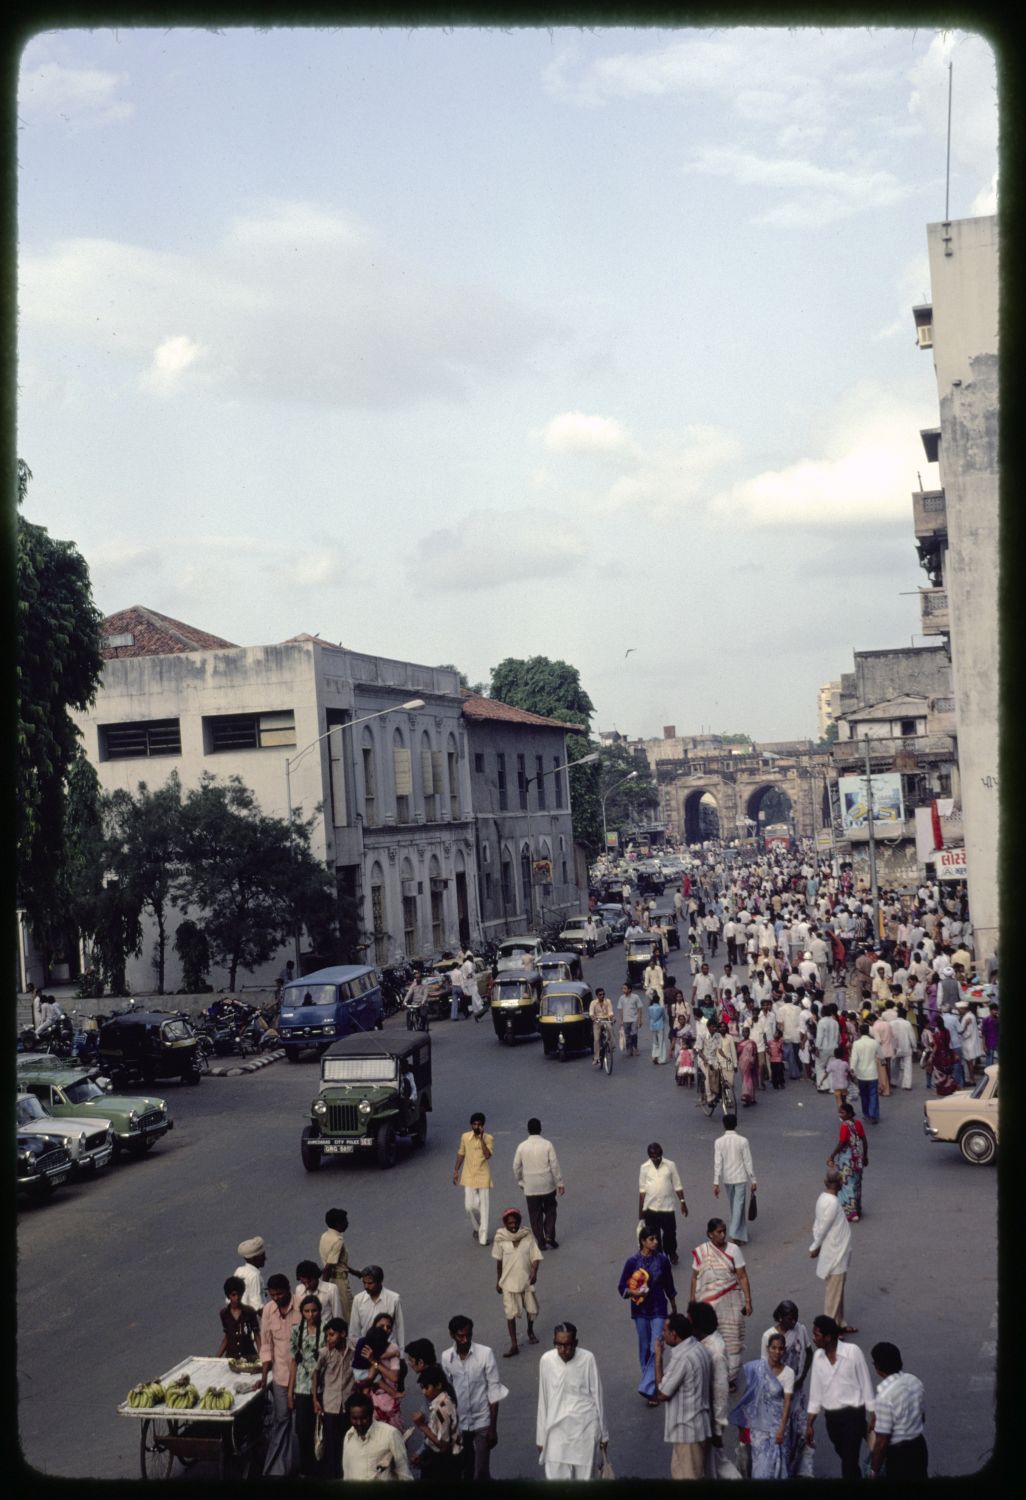 View of square west of Tin Darwaza, visible in background.